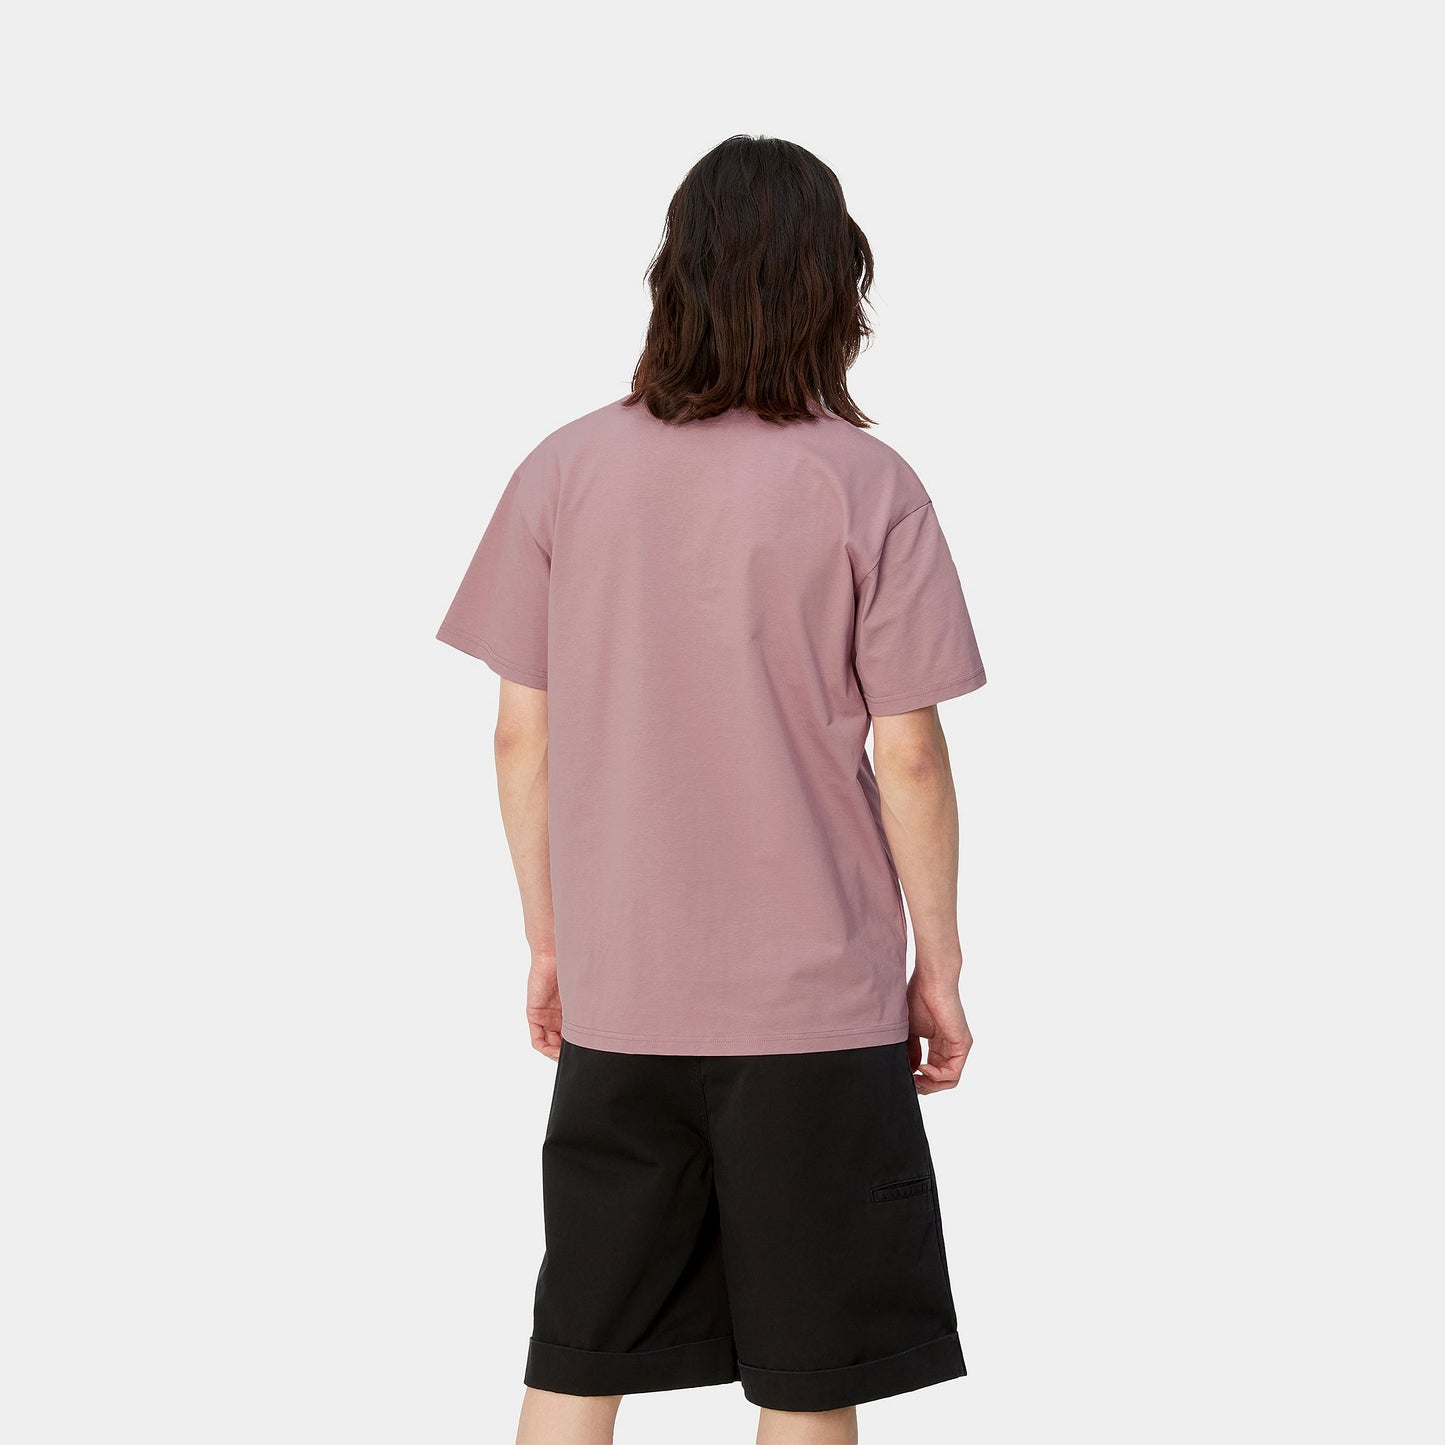 CARHARTT WIP S/S CHASE T-Shirt - Glassy Pink Gold